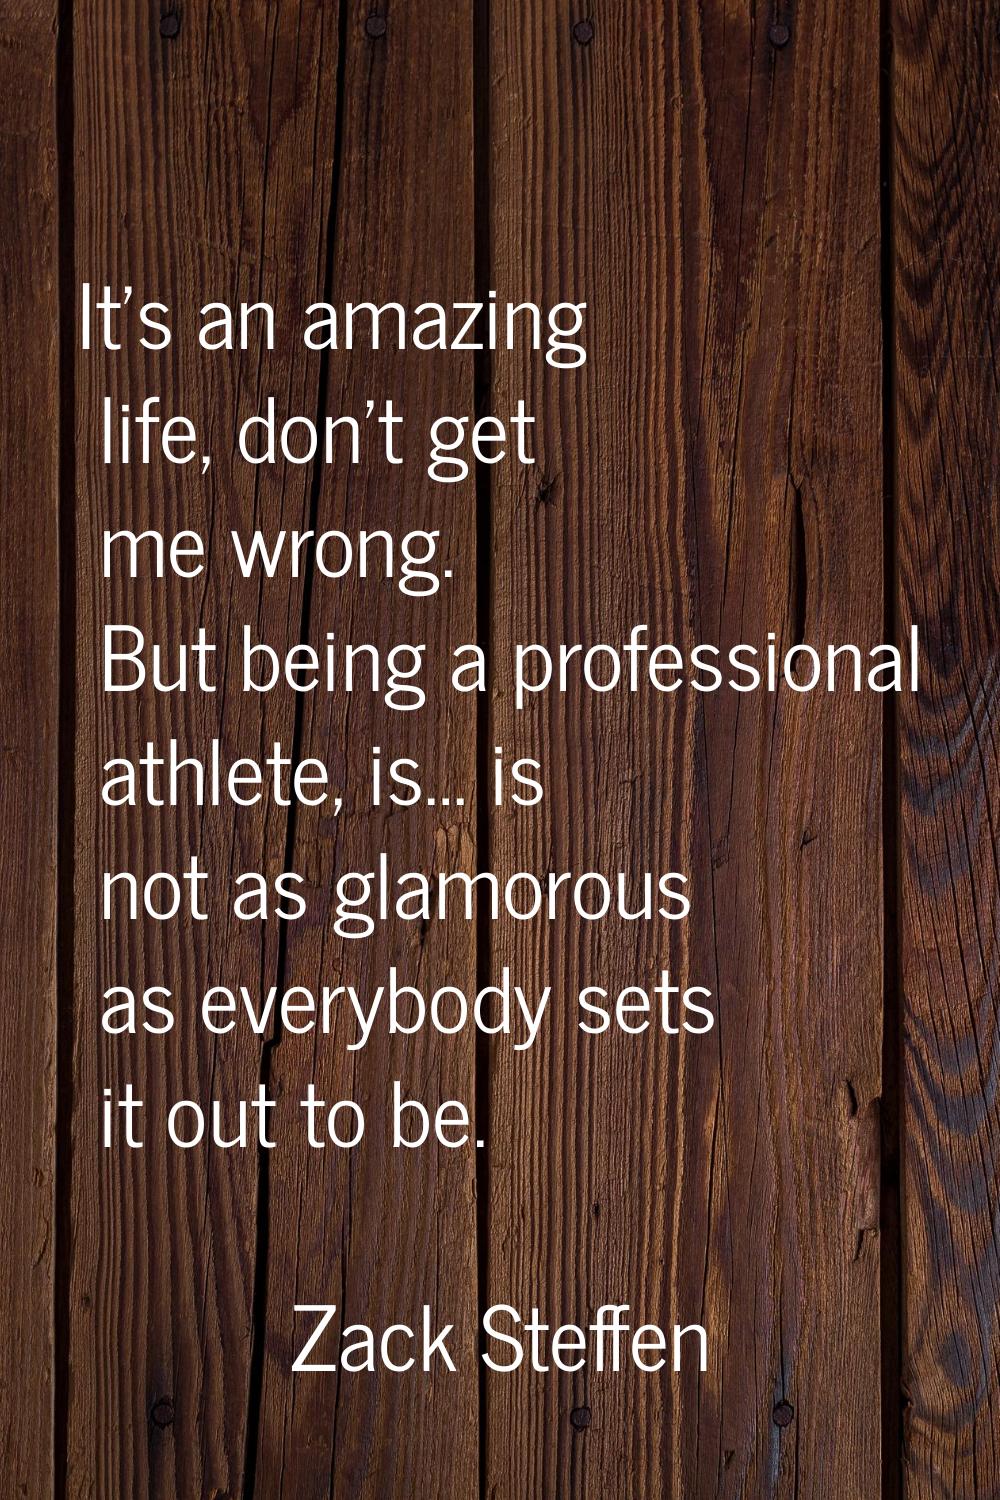 It’s an amazing life, don’t get me wrong. But being a professional athlete, is… is not as glamorous